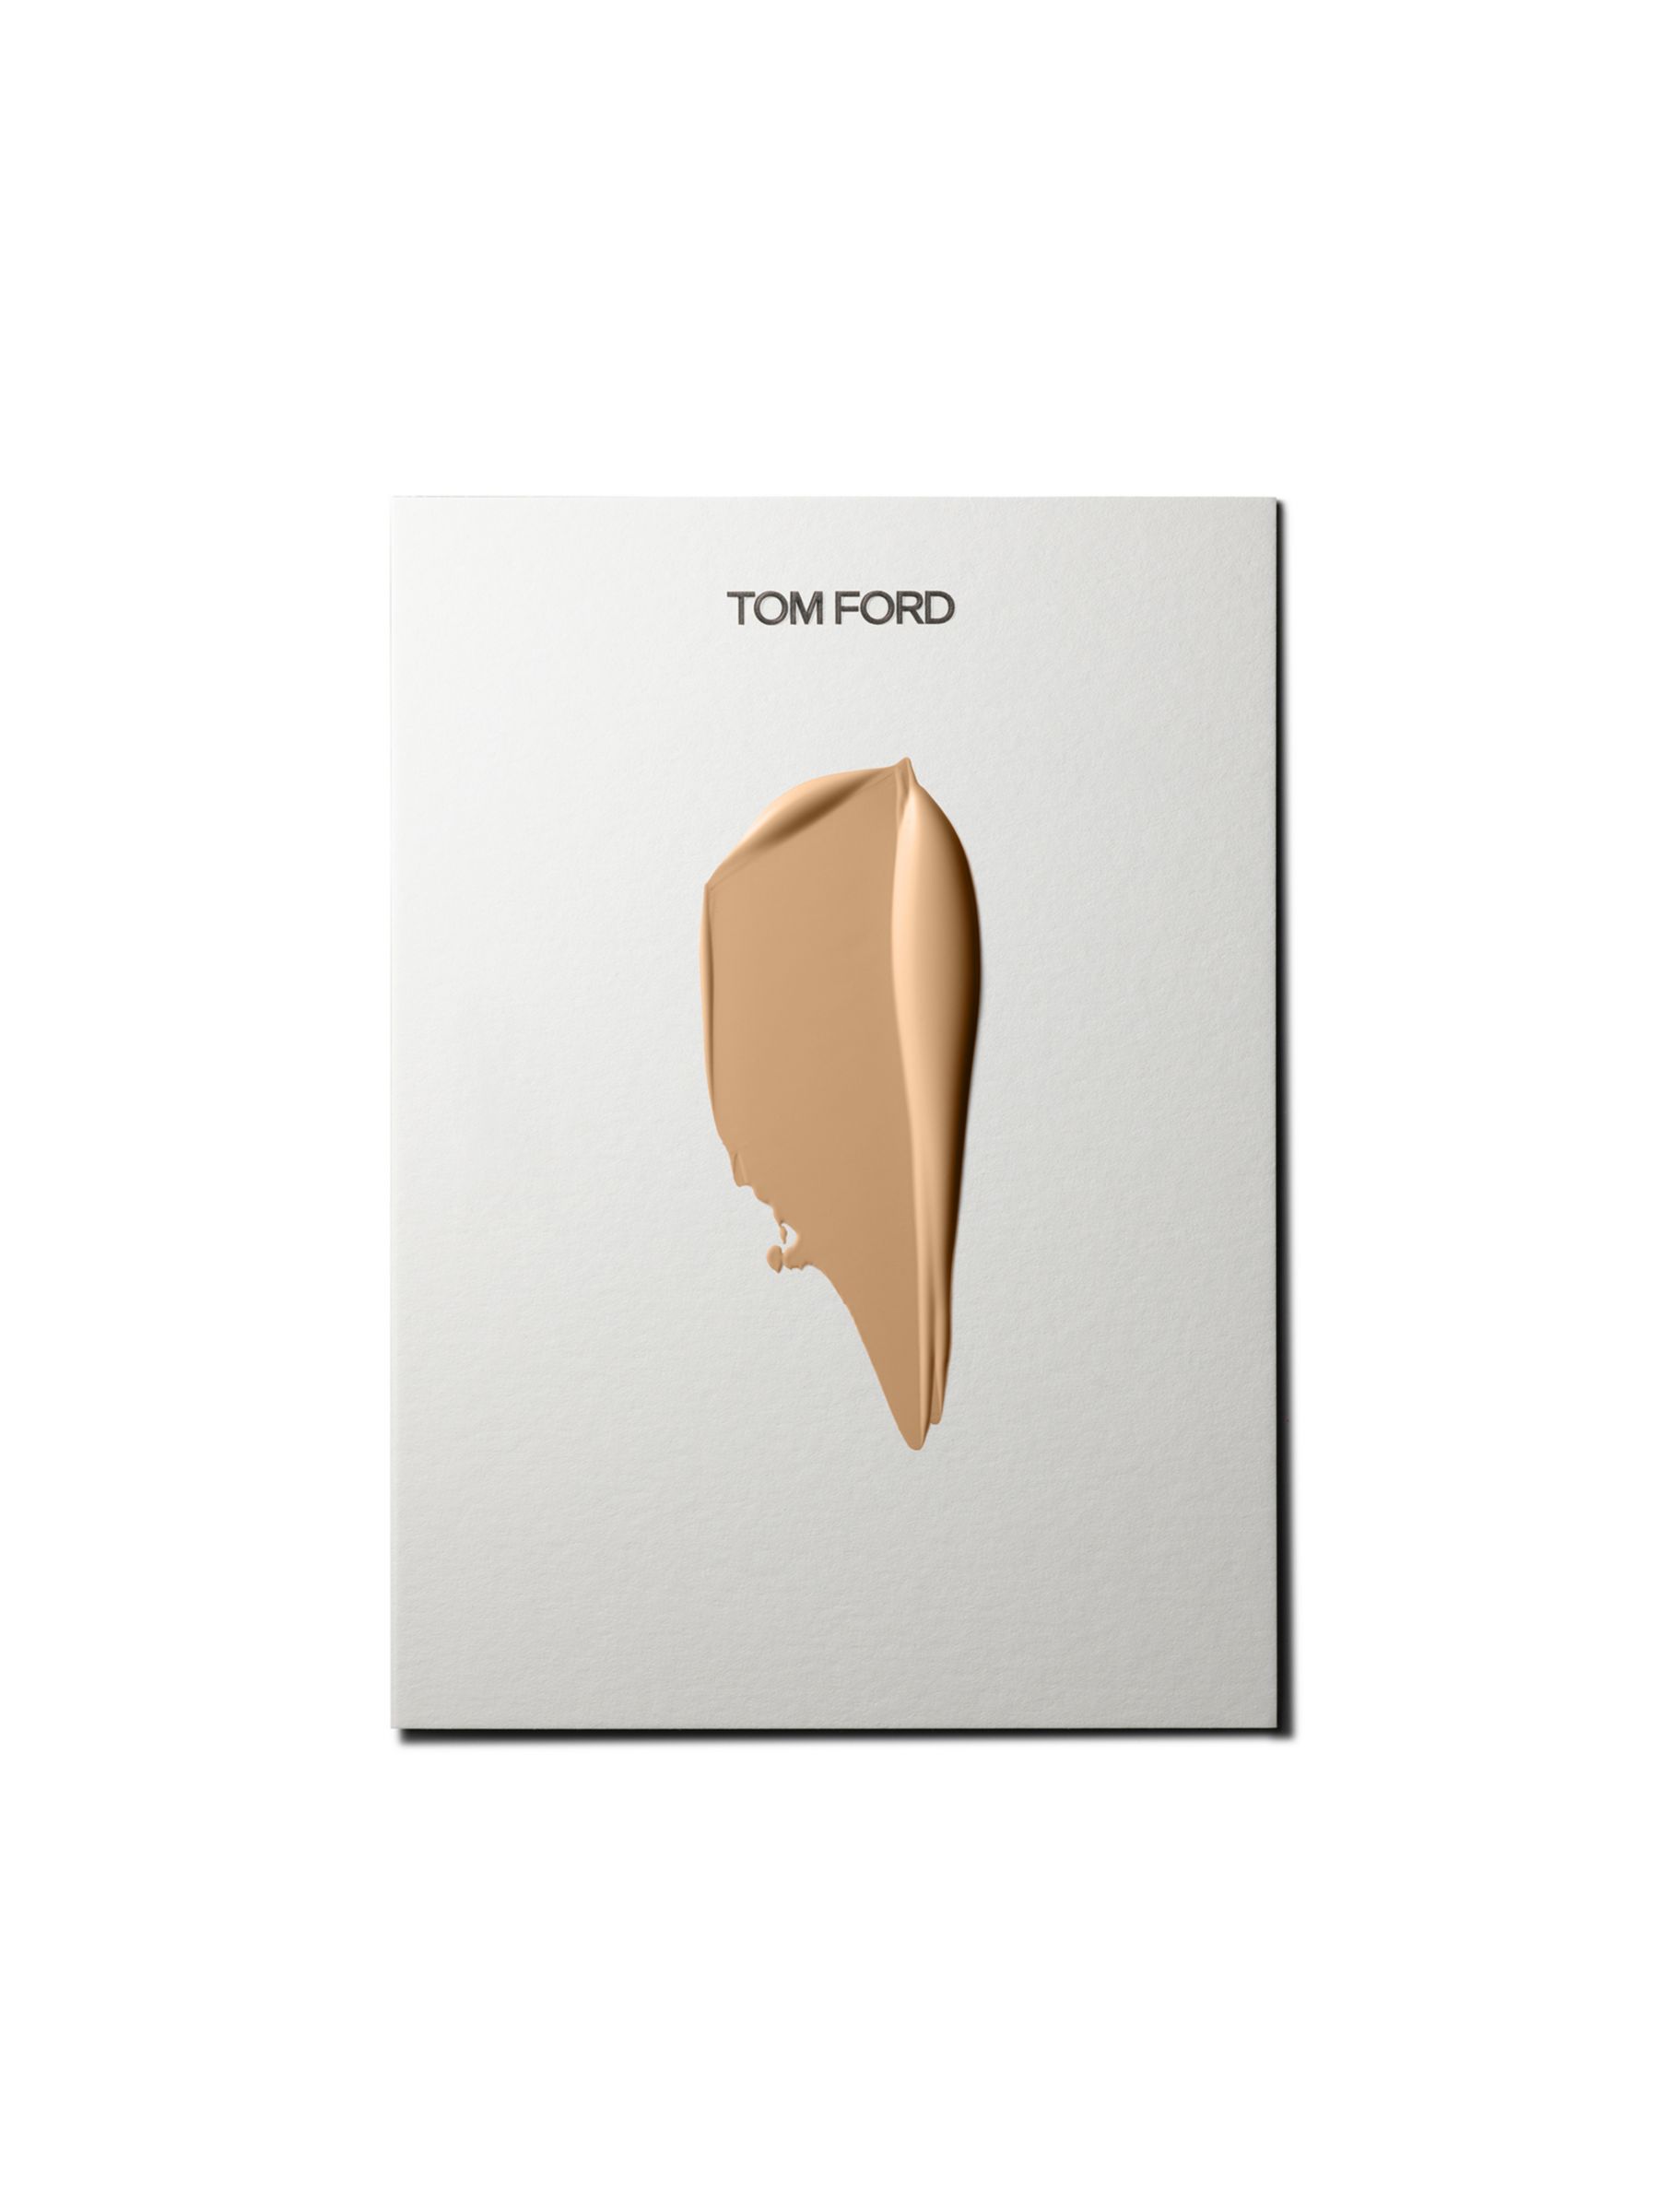 TOM FORD Traceless Soft Matte Foundation,  Bisque at John Lewis &  Partners